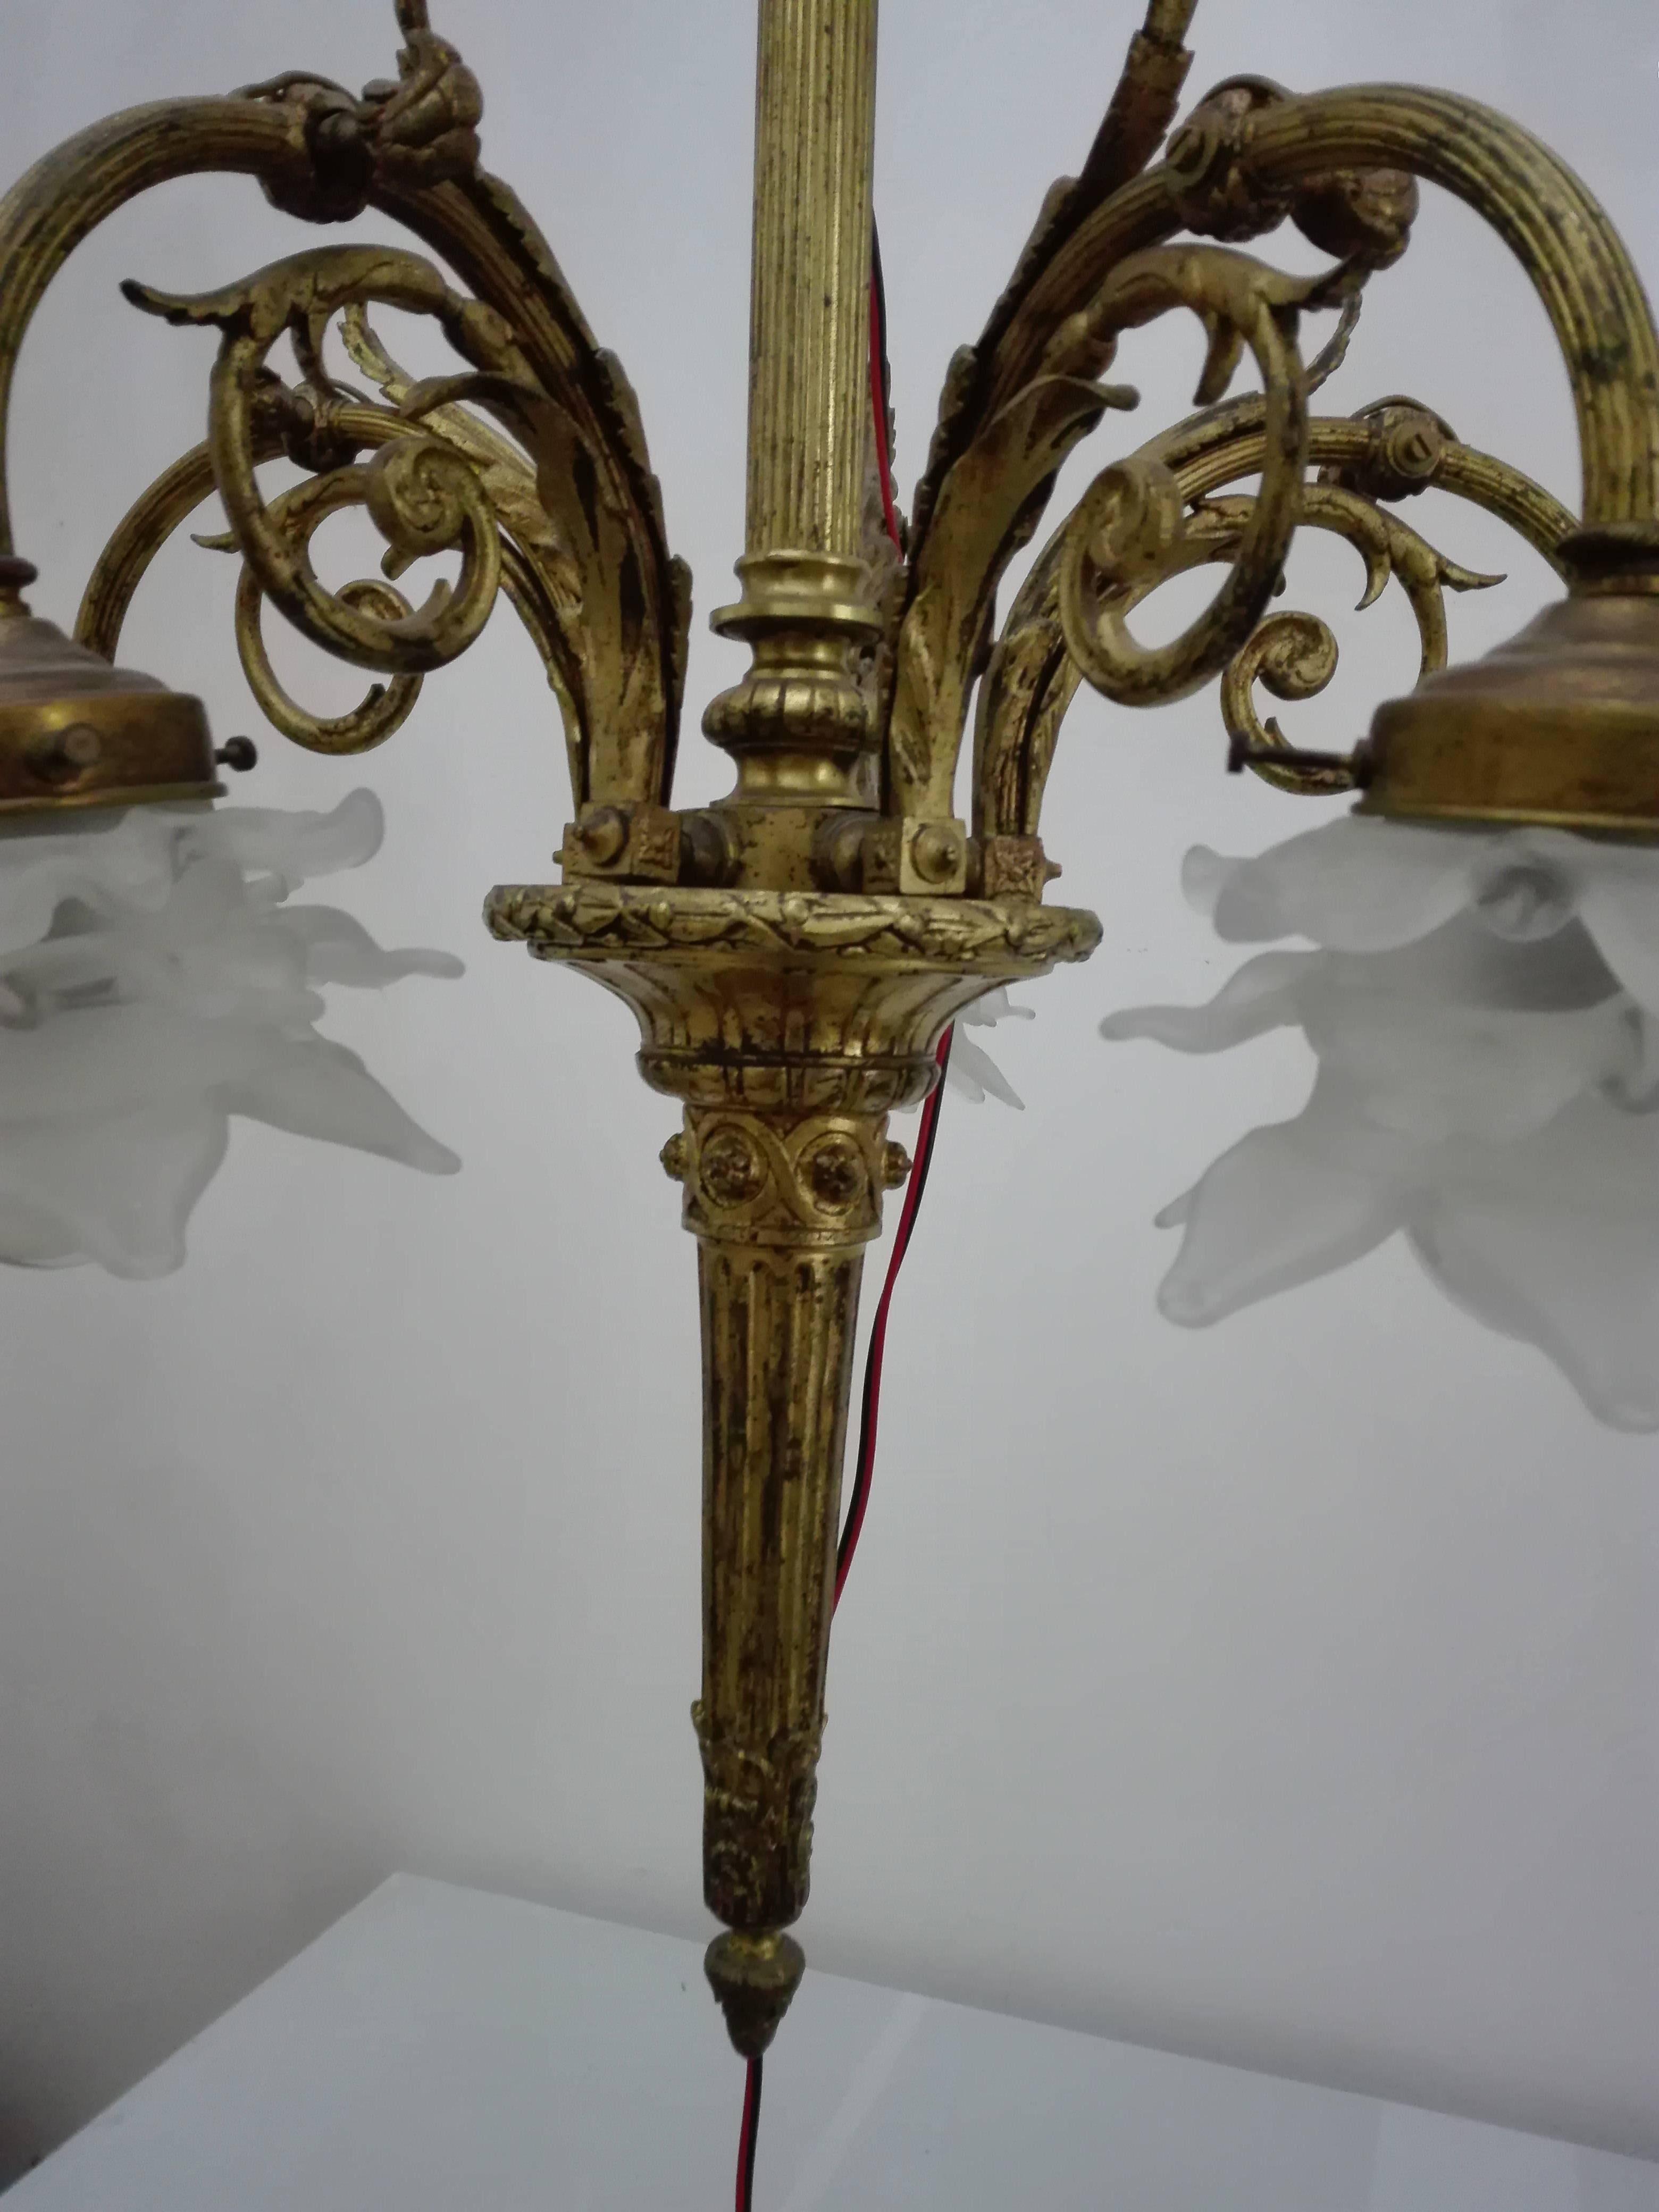 Elegant five lights bronze chandelier with beautiful flower-shaped lampshades, embellished with crystals, France, 1960s
Dimensions
height 100 cm
diameter 55 cm.